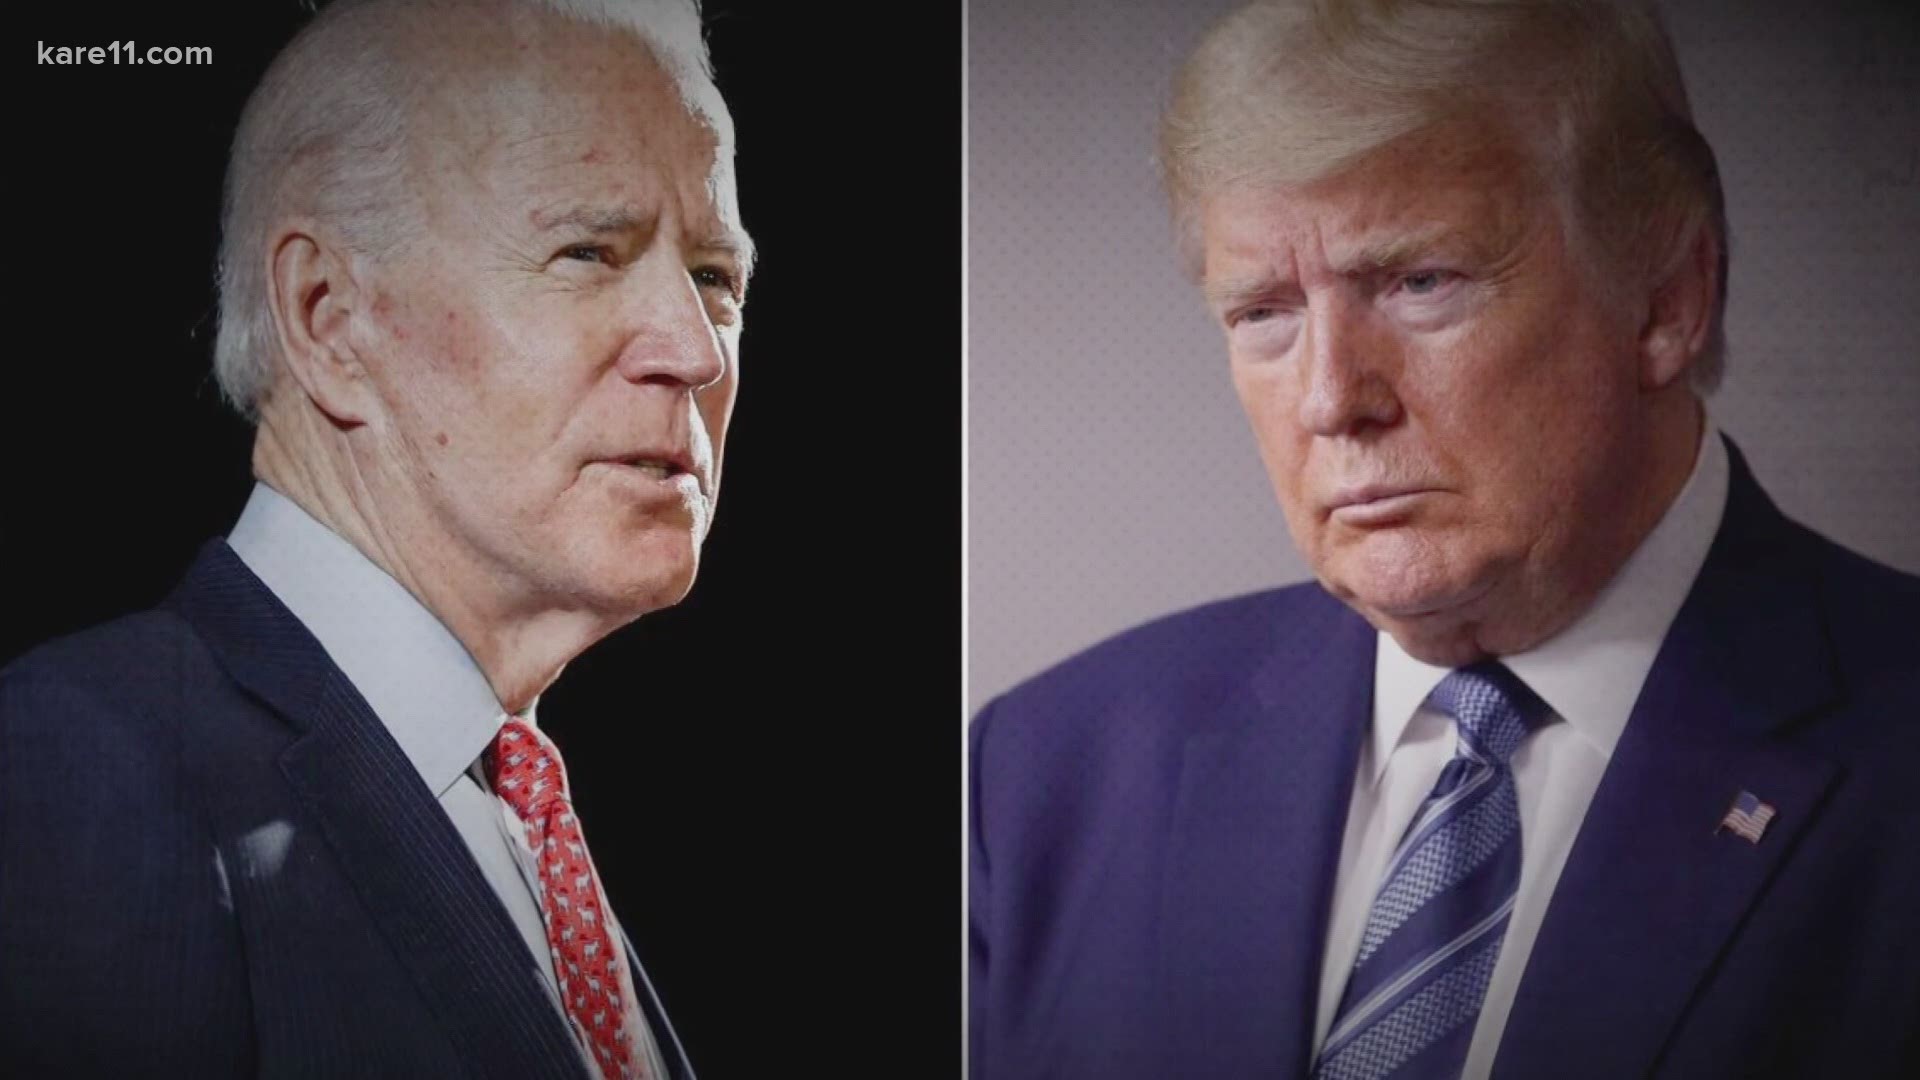 Trump is expected to win northern Minnesota, but the region could still prove critical to Joe Biden's campaign.